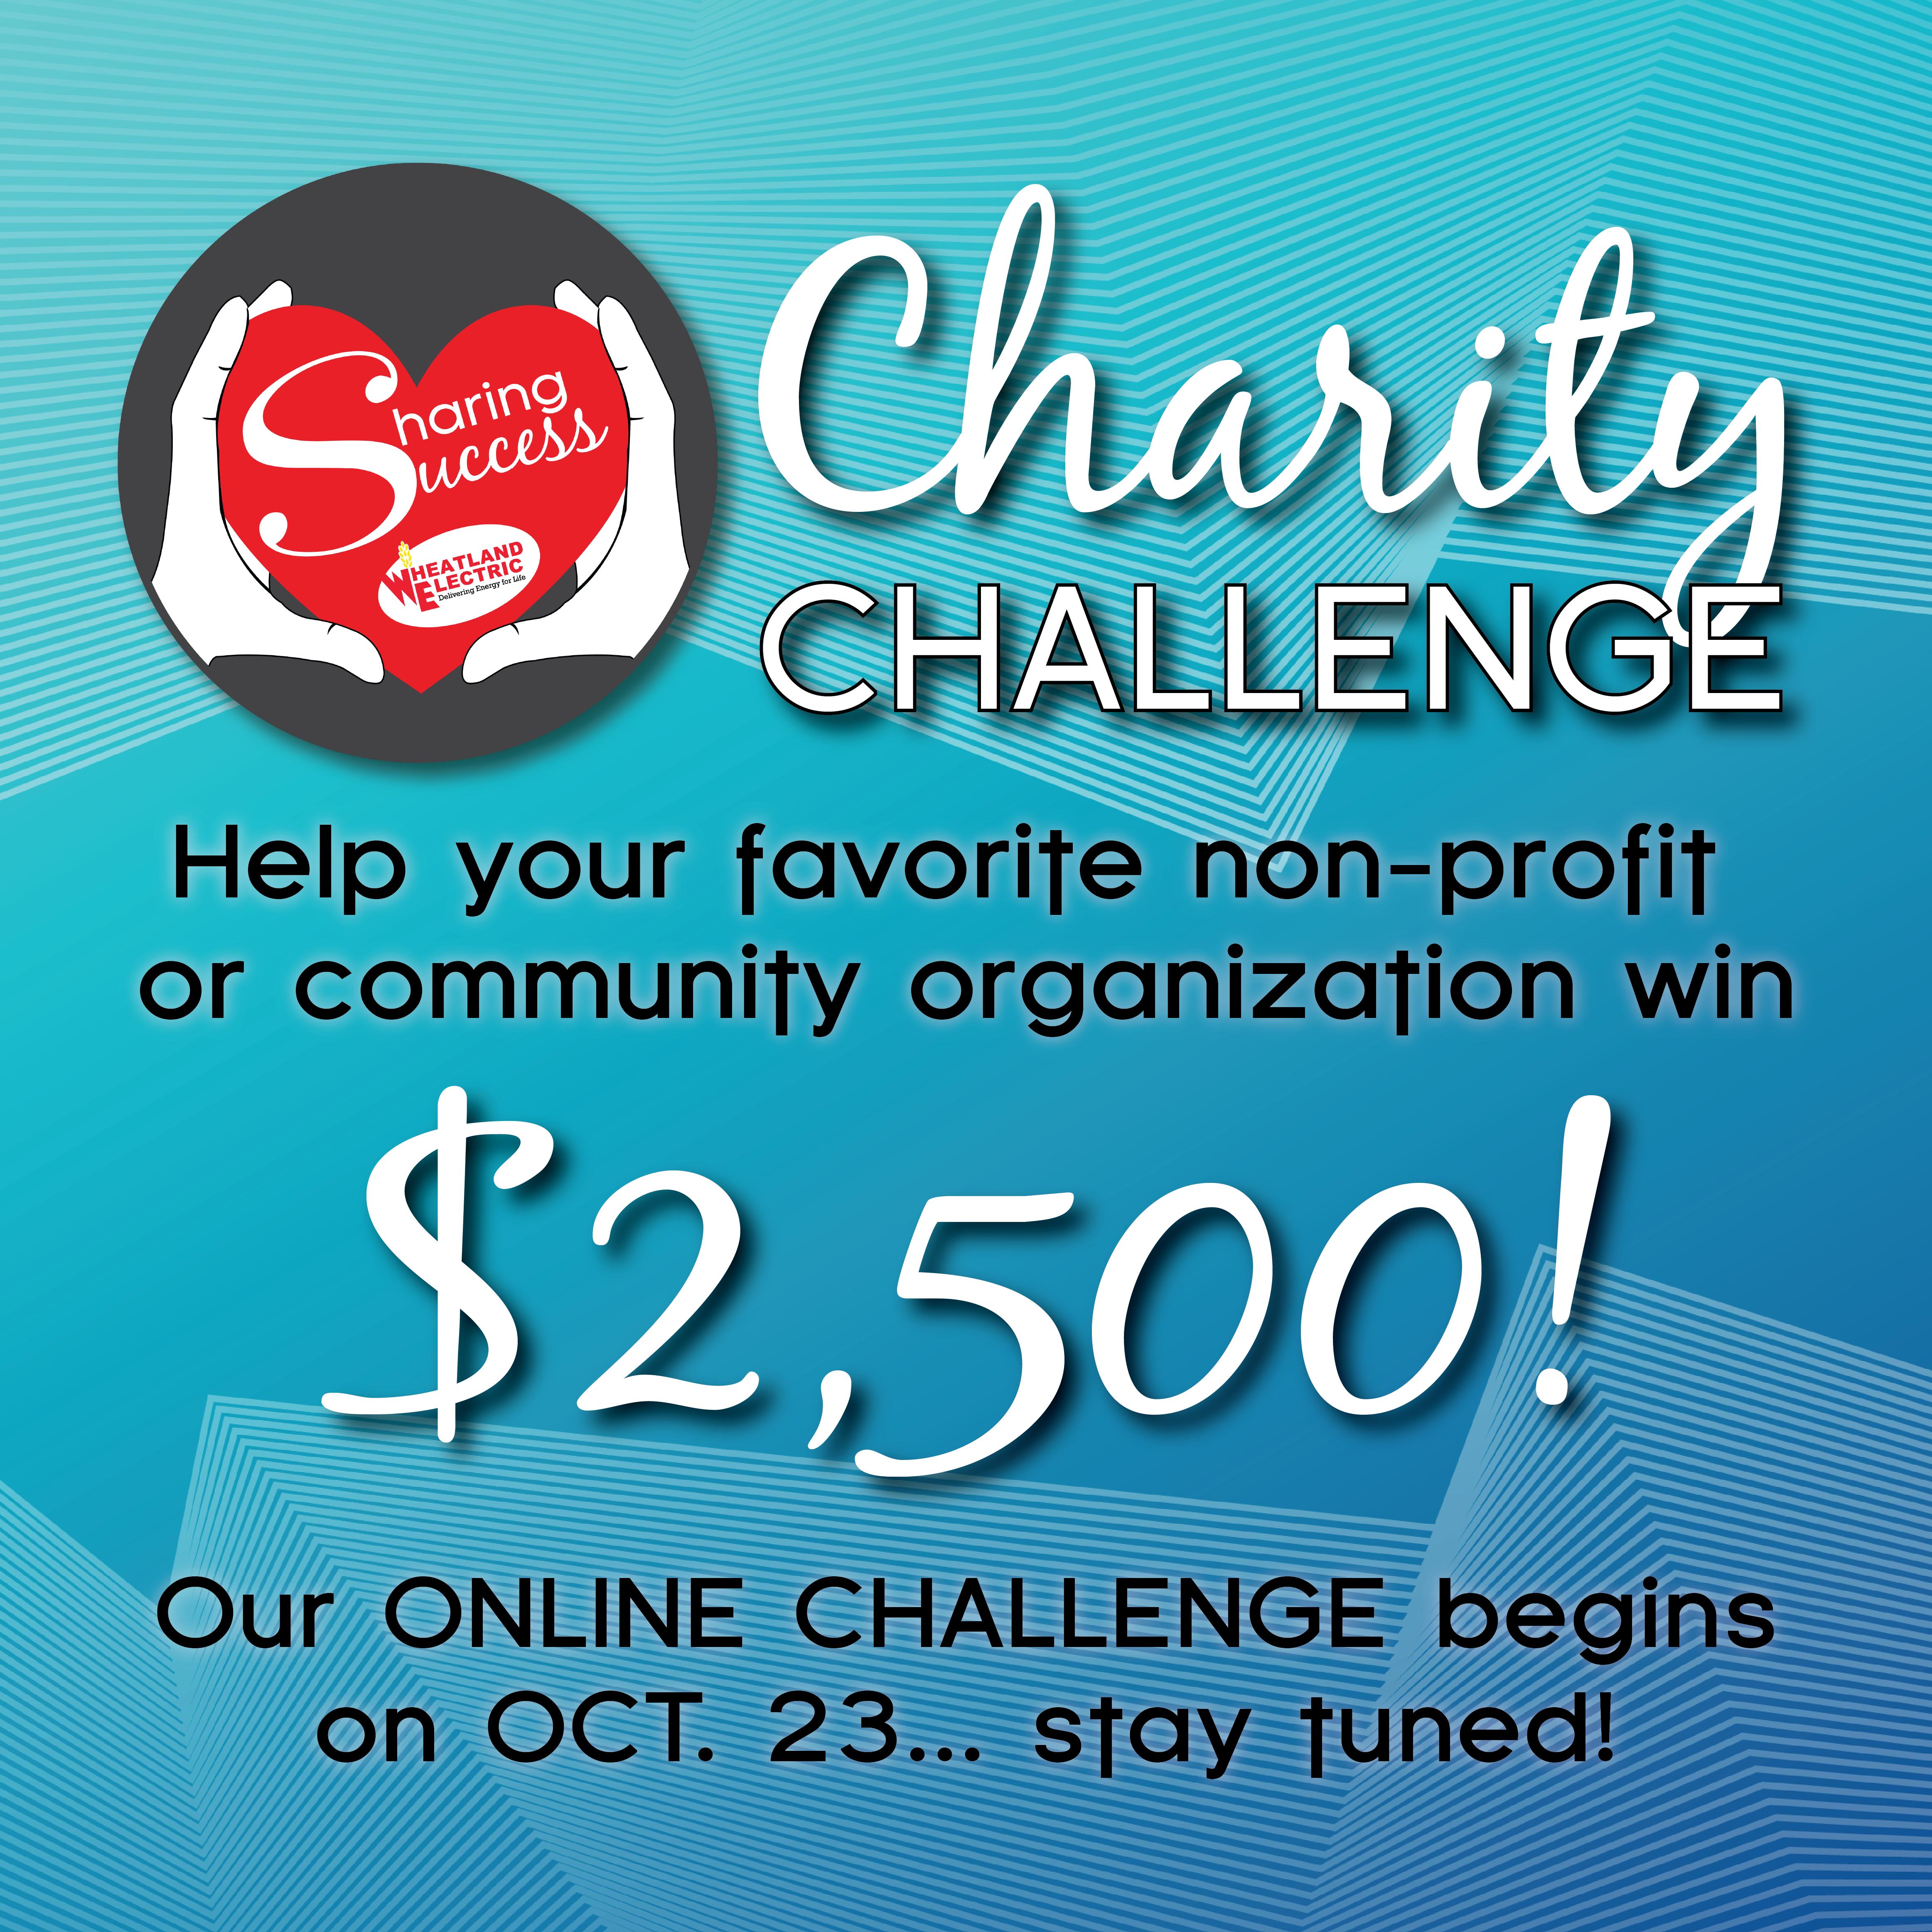 Sharing Success Charity Challenge